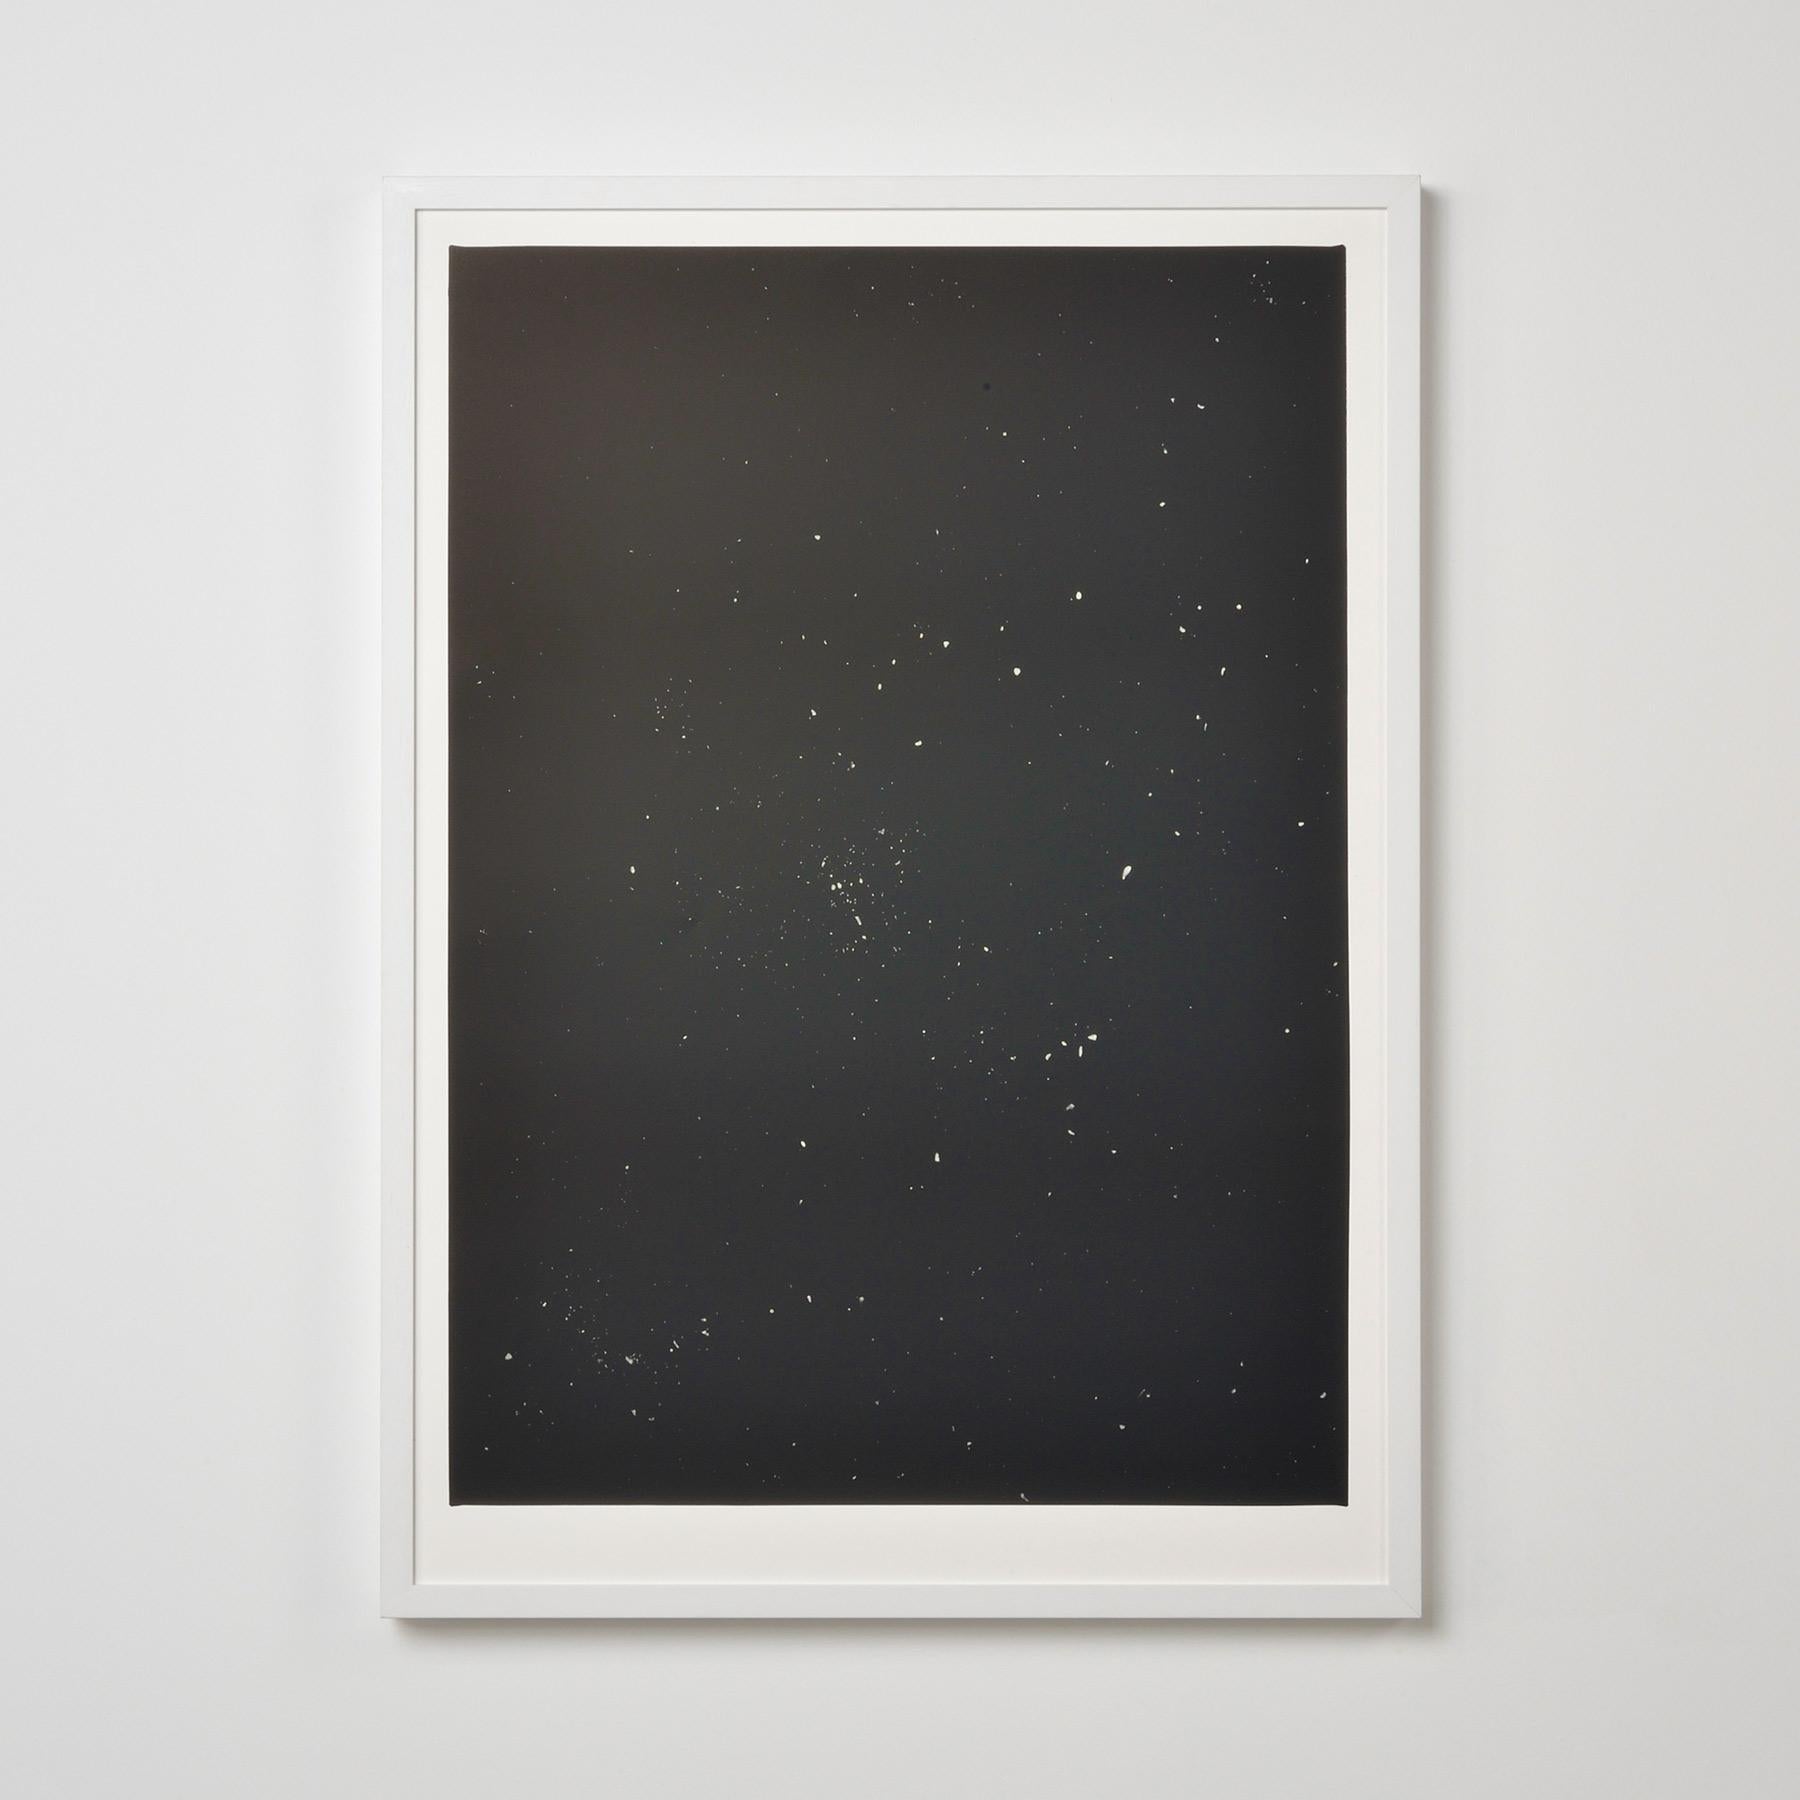 Ugo Rondinone, Stars
Contemporary, 21st Century, Silkscreen, Limited Edition, Skyscapes
Silkscreen
Edition of 300
105 x 74.7 cm (41.3 x 29.4 in)
Signed and numbered, accompanied by Certificate of Authenticity
In mint condition, as acquired from the